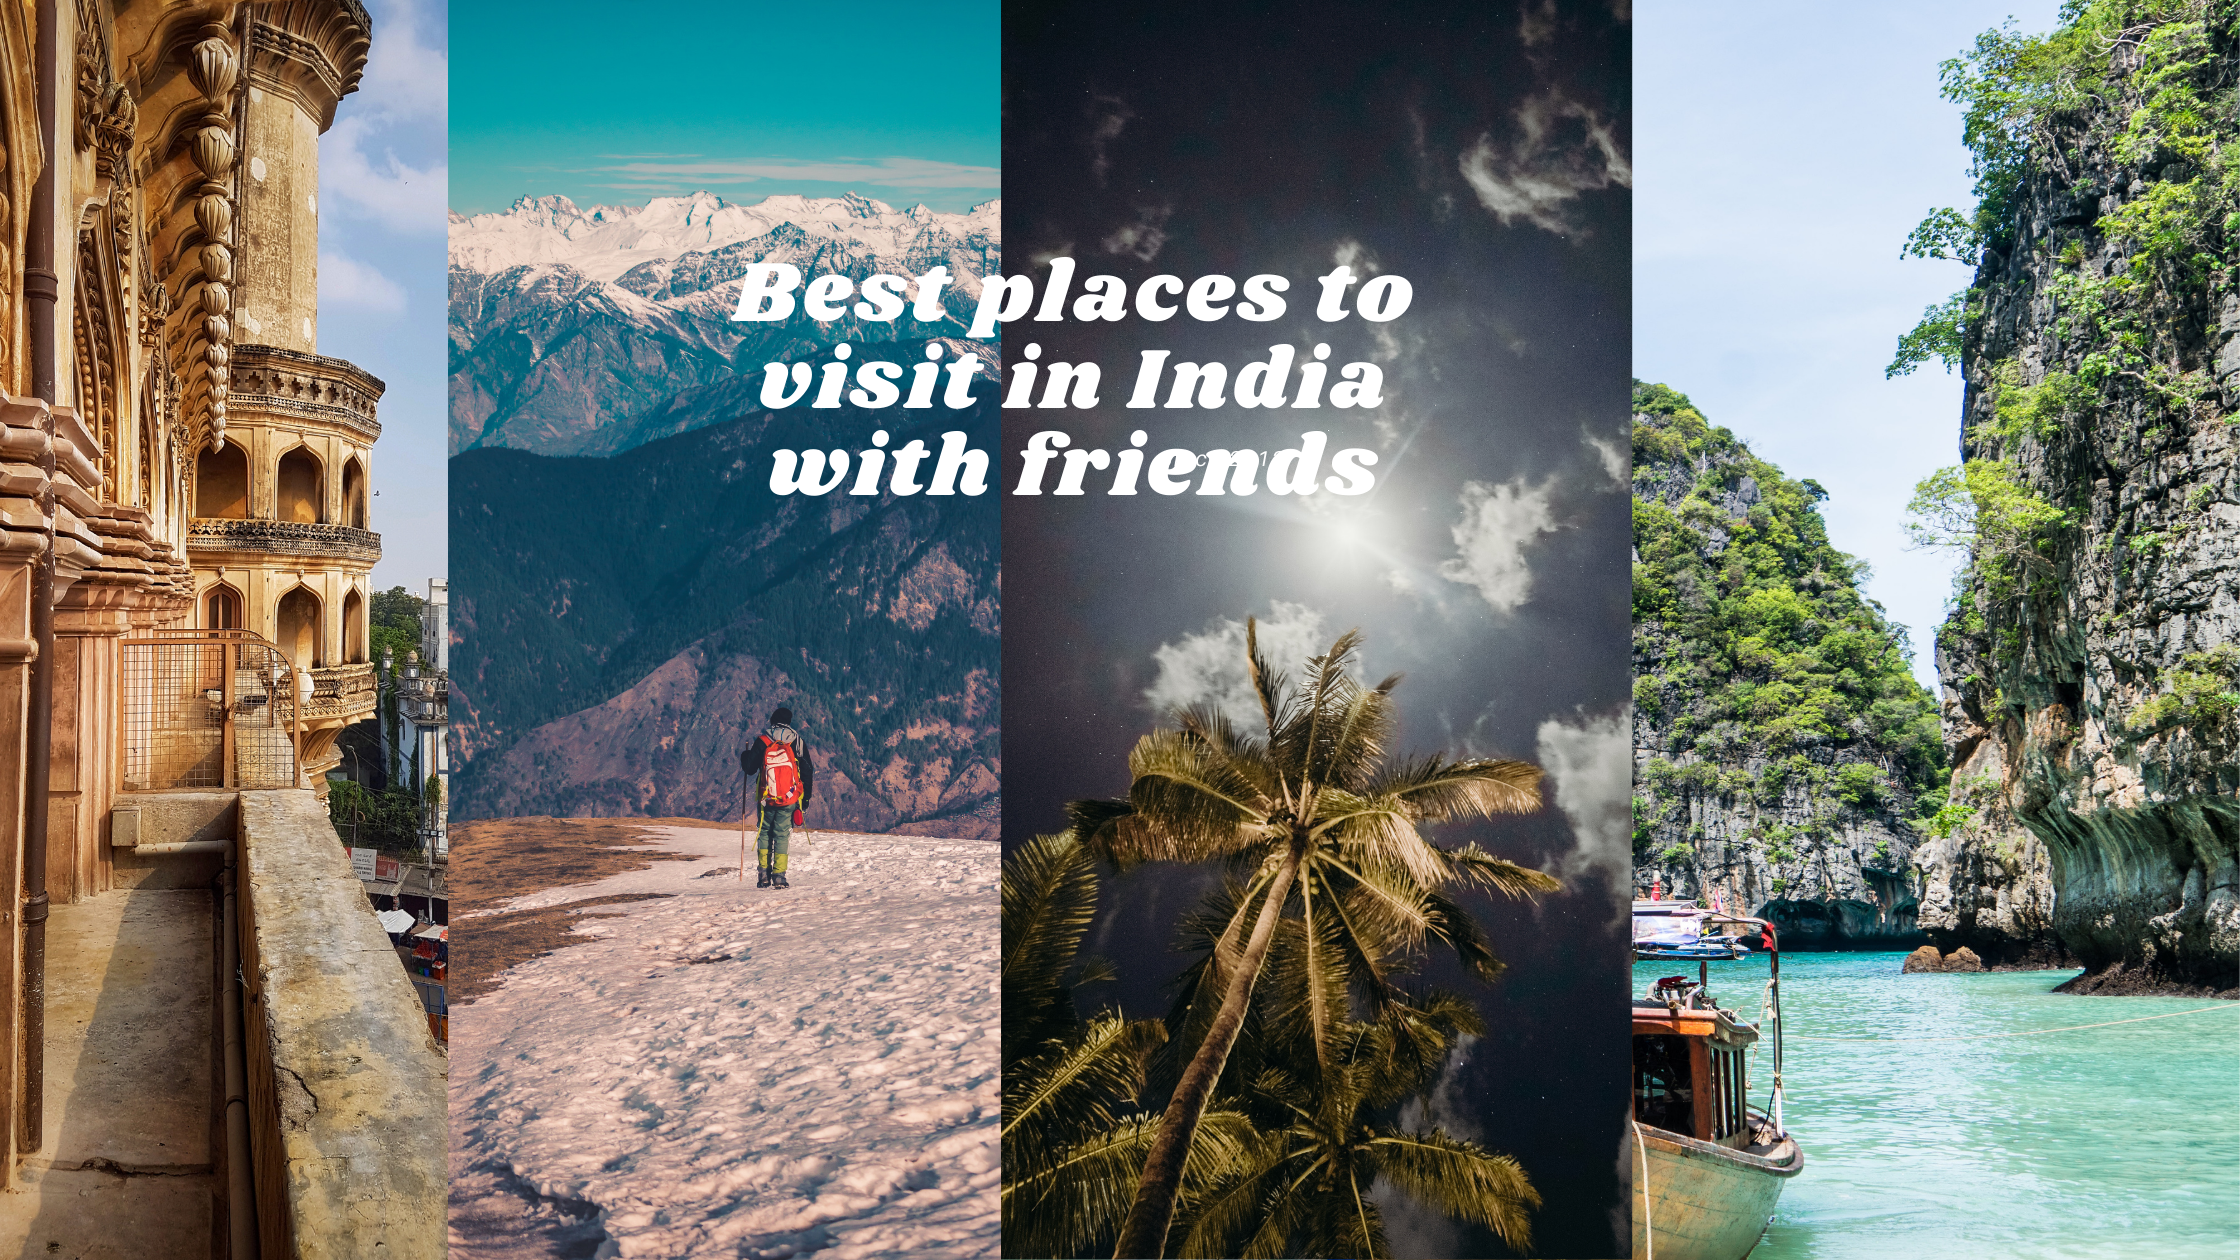 The Best Places To Visit In India With Friends